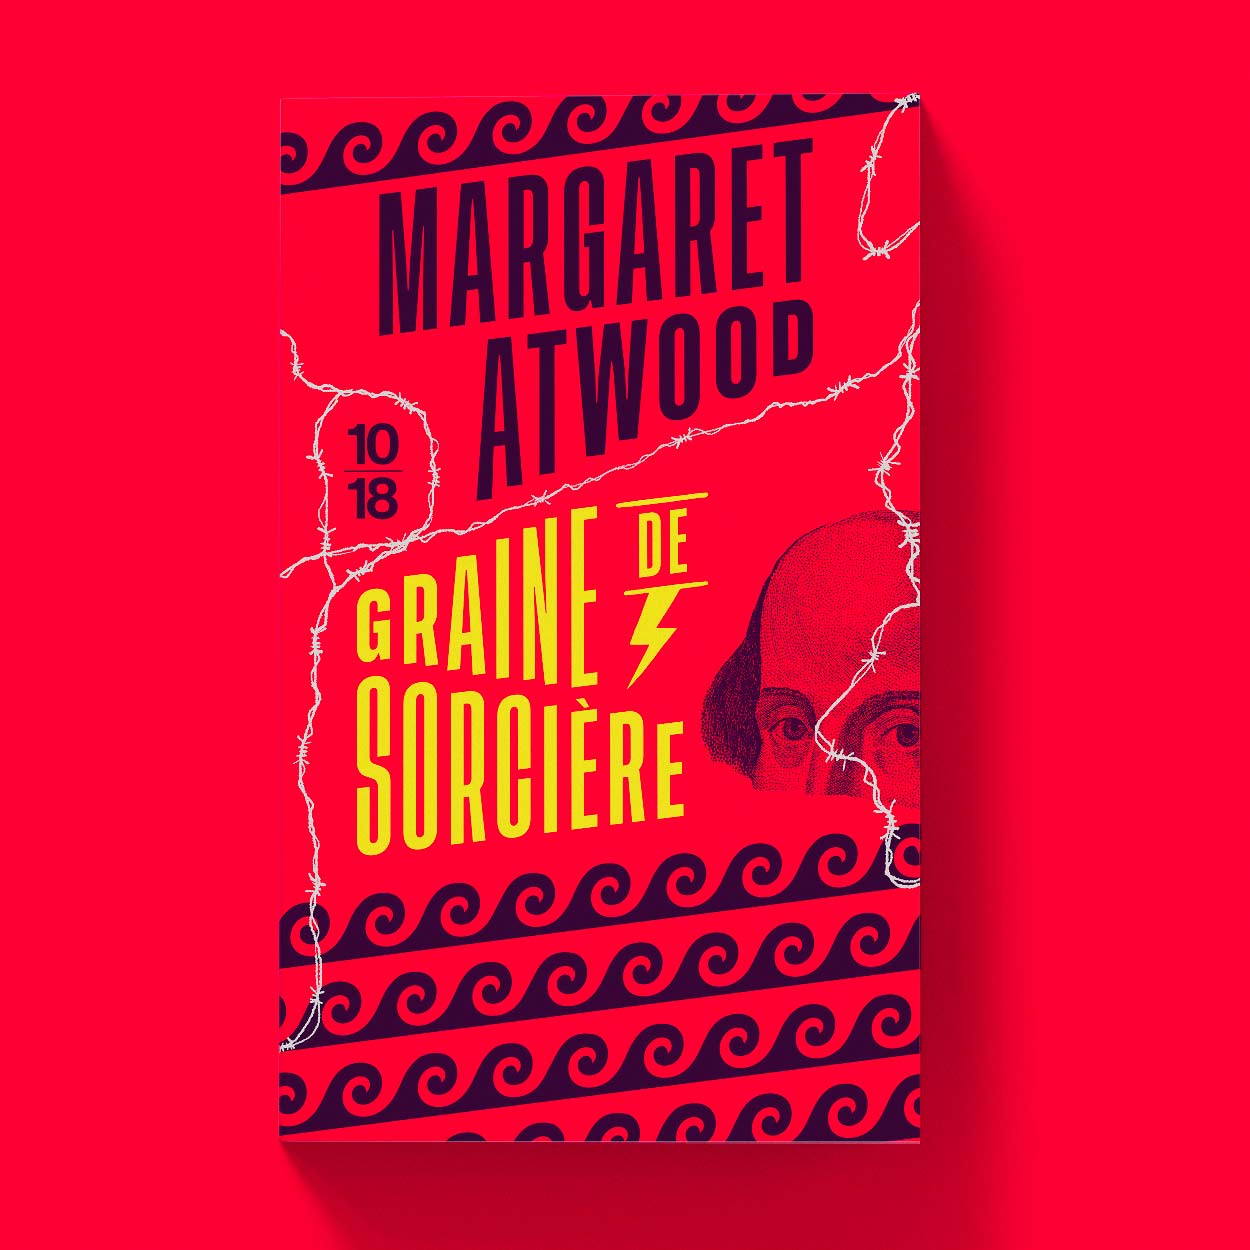 book_atwood_8